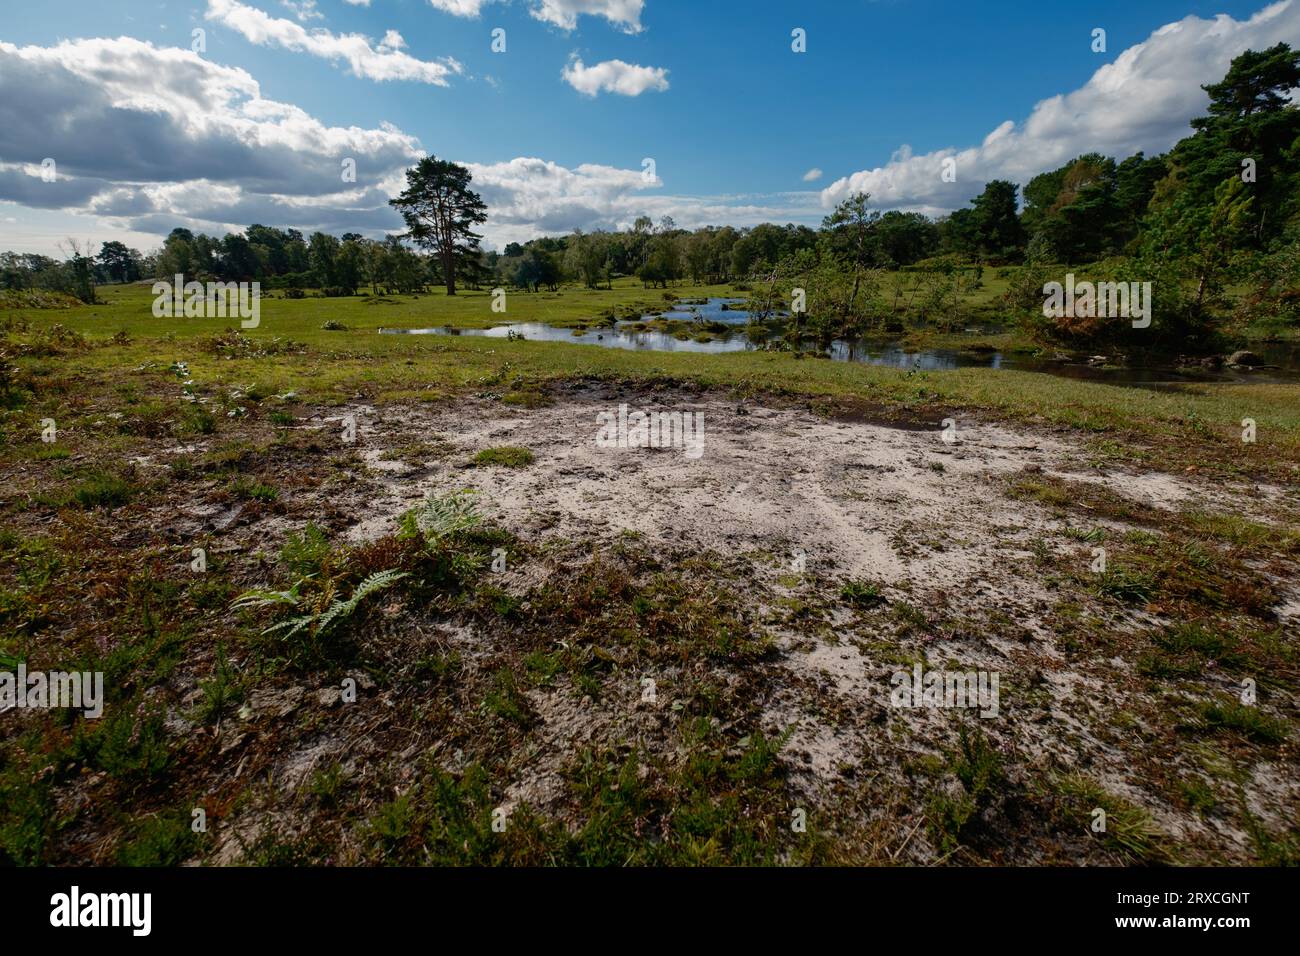 Exposed sand in the New Forest Hampshire UK showing the geological make up of sedimentary deposits. The area was once a shallow sea and river system. Stock Photo